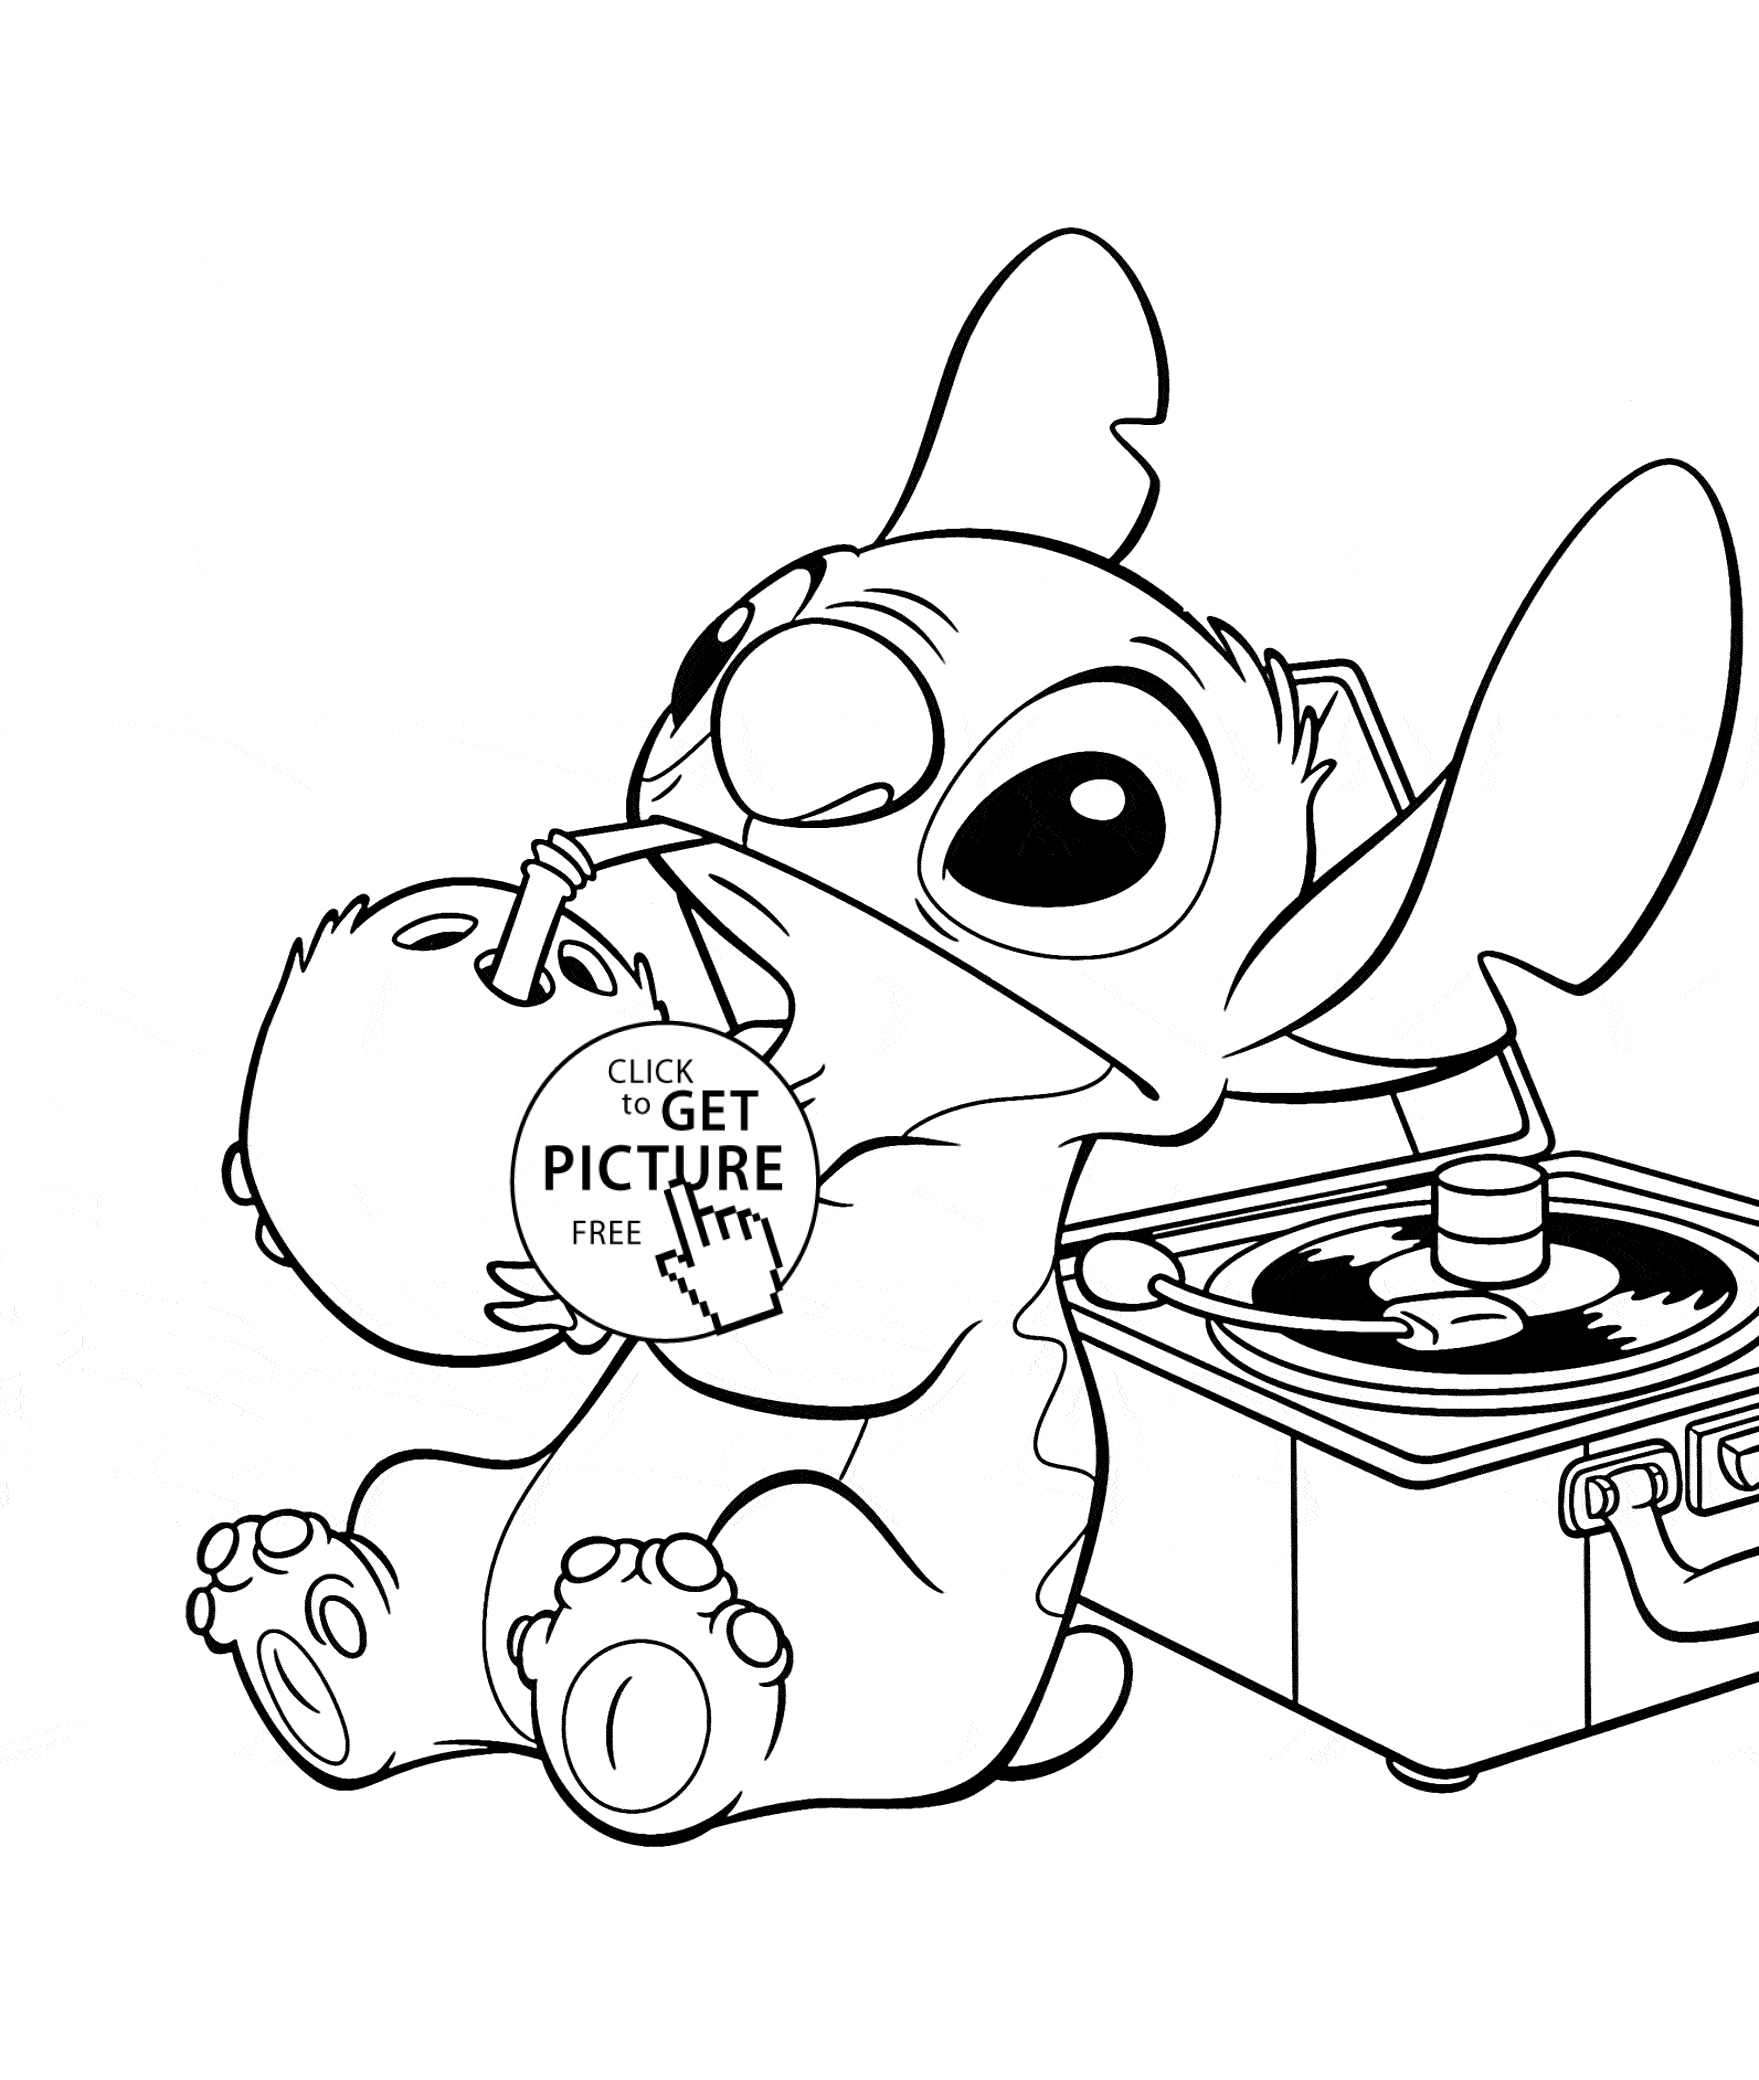 Funny Stitch - Lilo and Stich coloring page for kids, disney ...